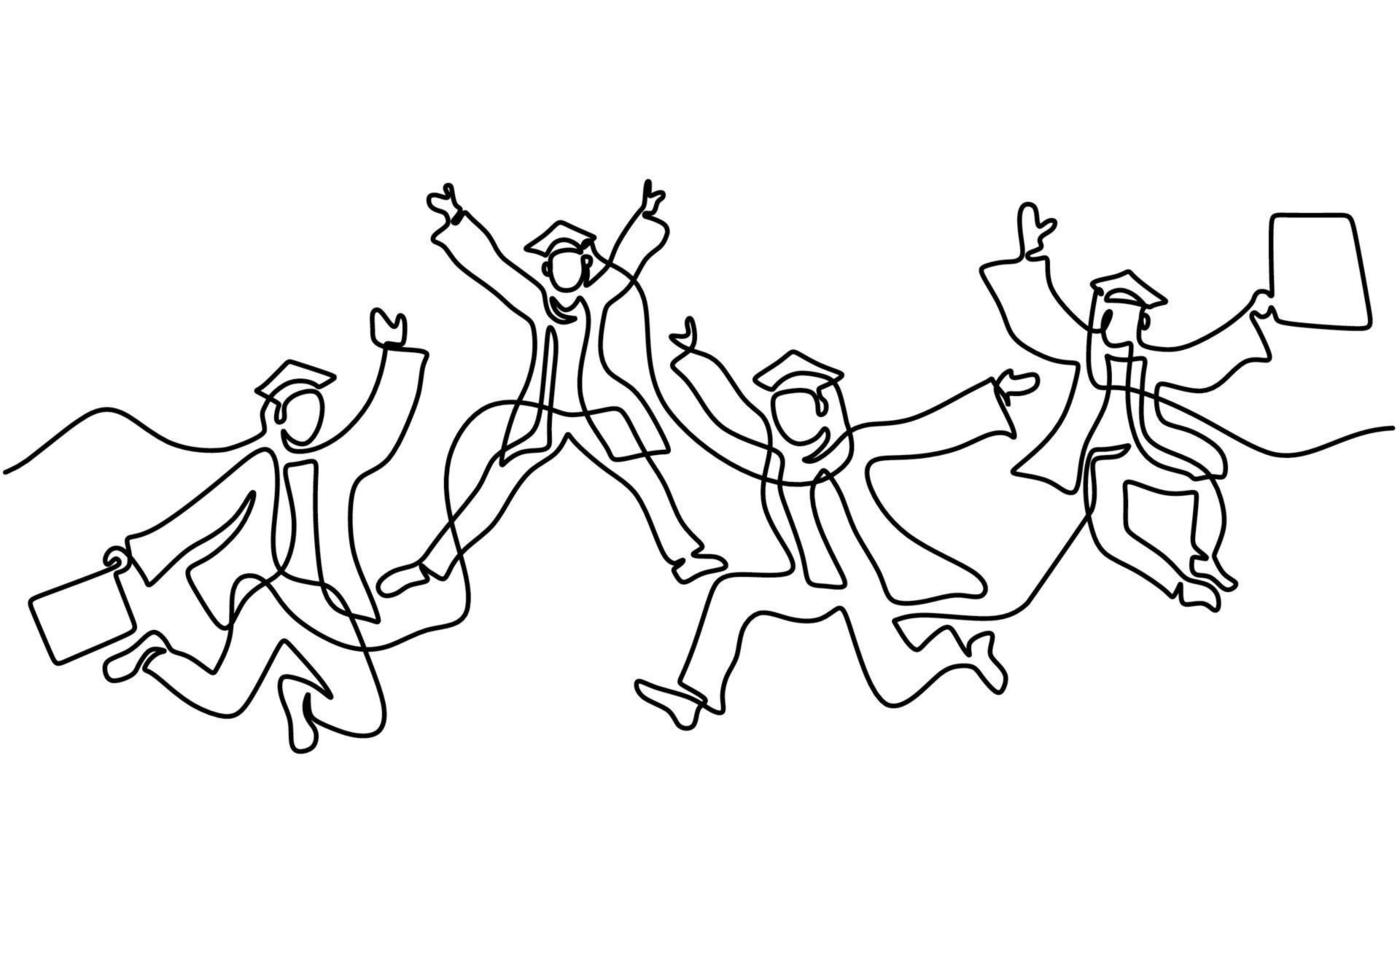 One line drawing of young happy graduate male and female college student jumping hand drawn continuous line art minimalism style on white background. Celebration concept. Vector sketch illustration